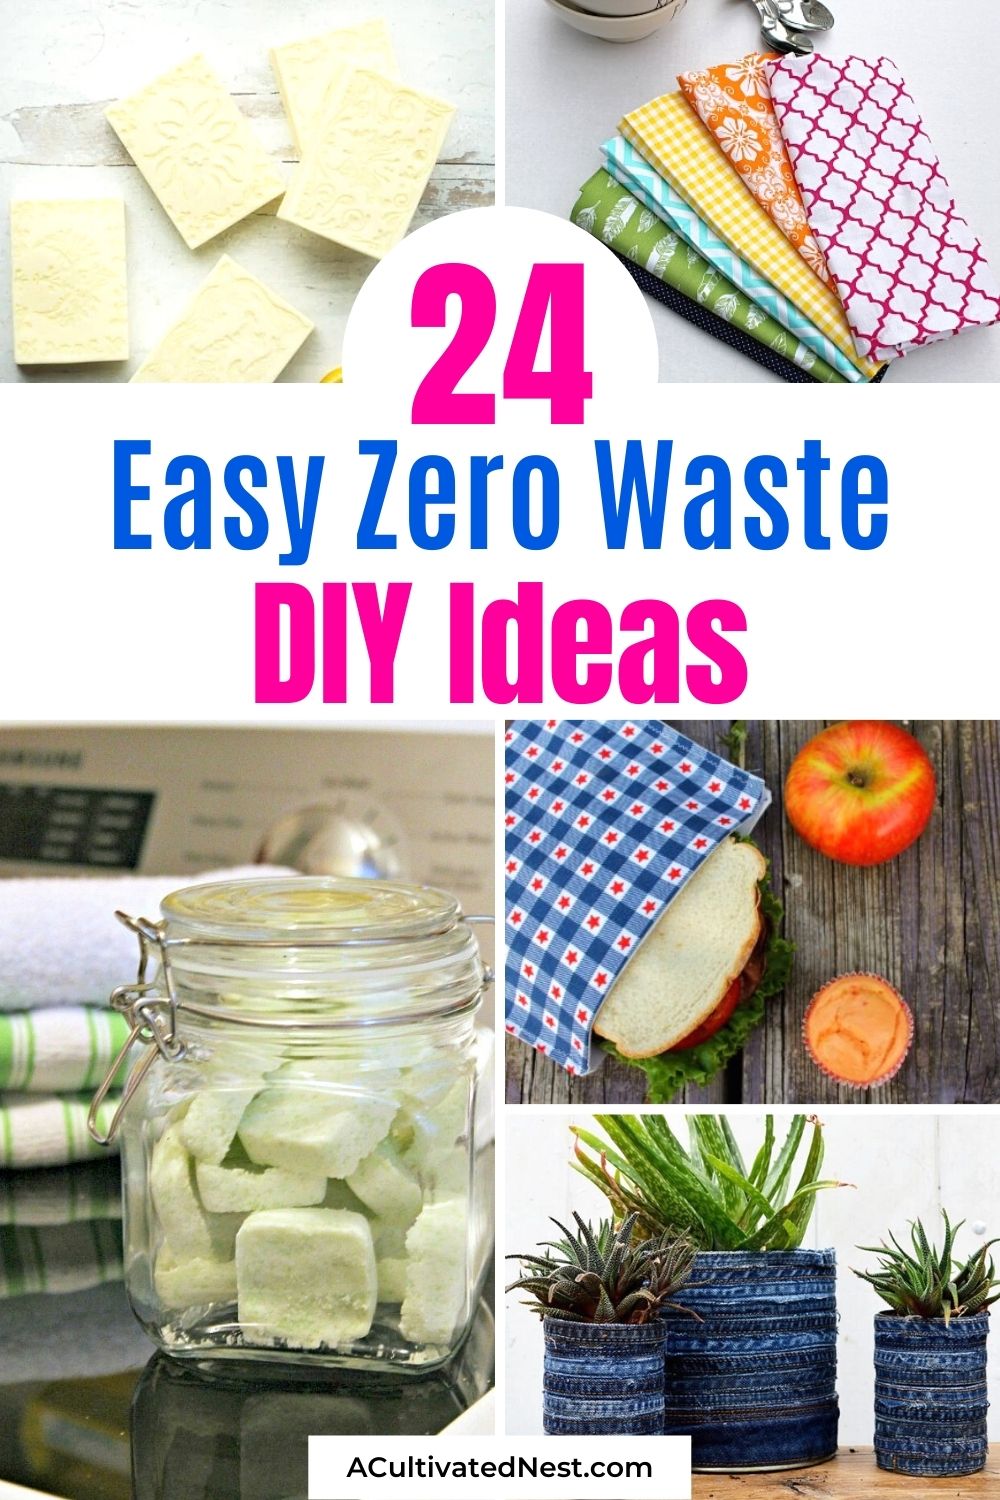 24 Easy Zero Waste DIY Ideas- Do a fun craft and do something good for the environment and your budget all at the same time with these easy zero waste DIY ideas! | #zeroWasteDIY #ecoFriendlyDIY #diyProject #livingOnABudget #ACultivatedNest